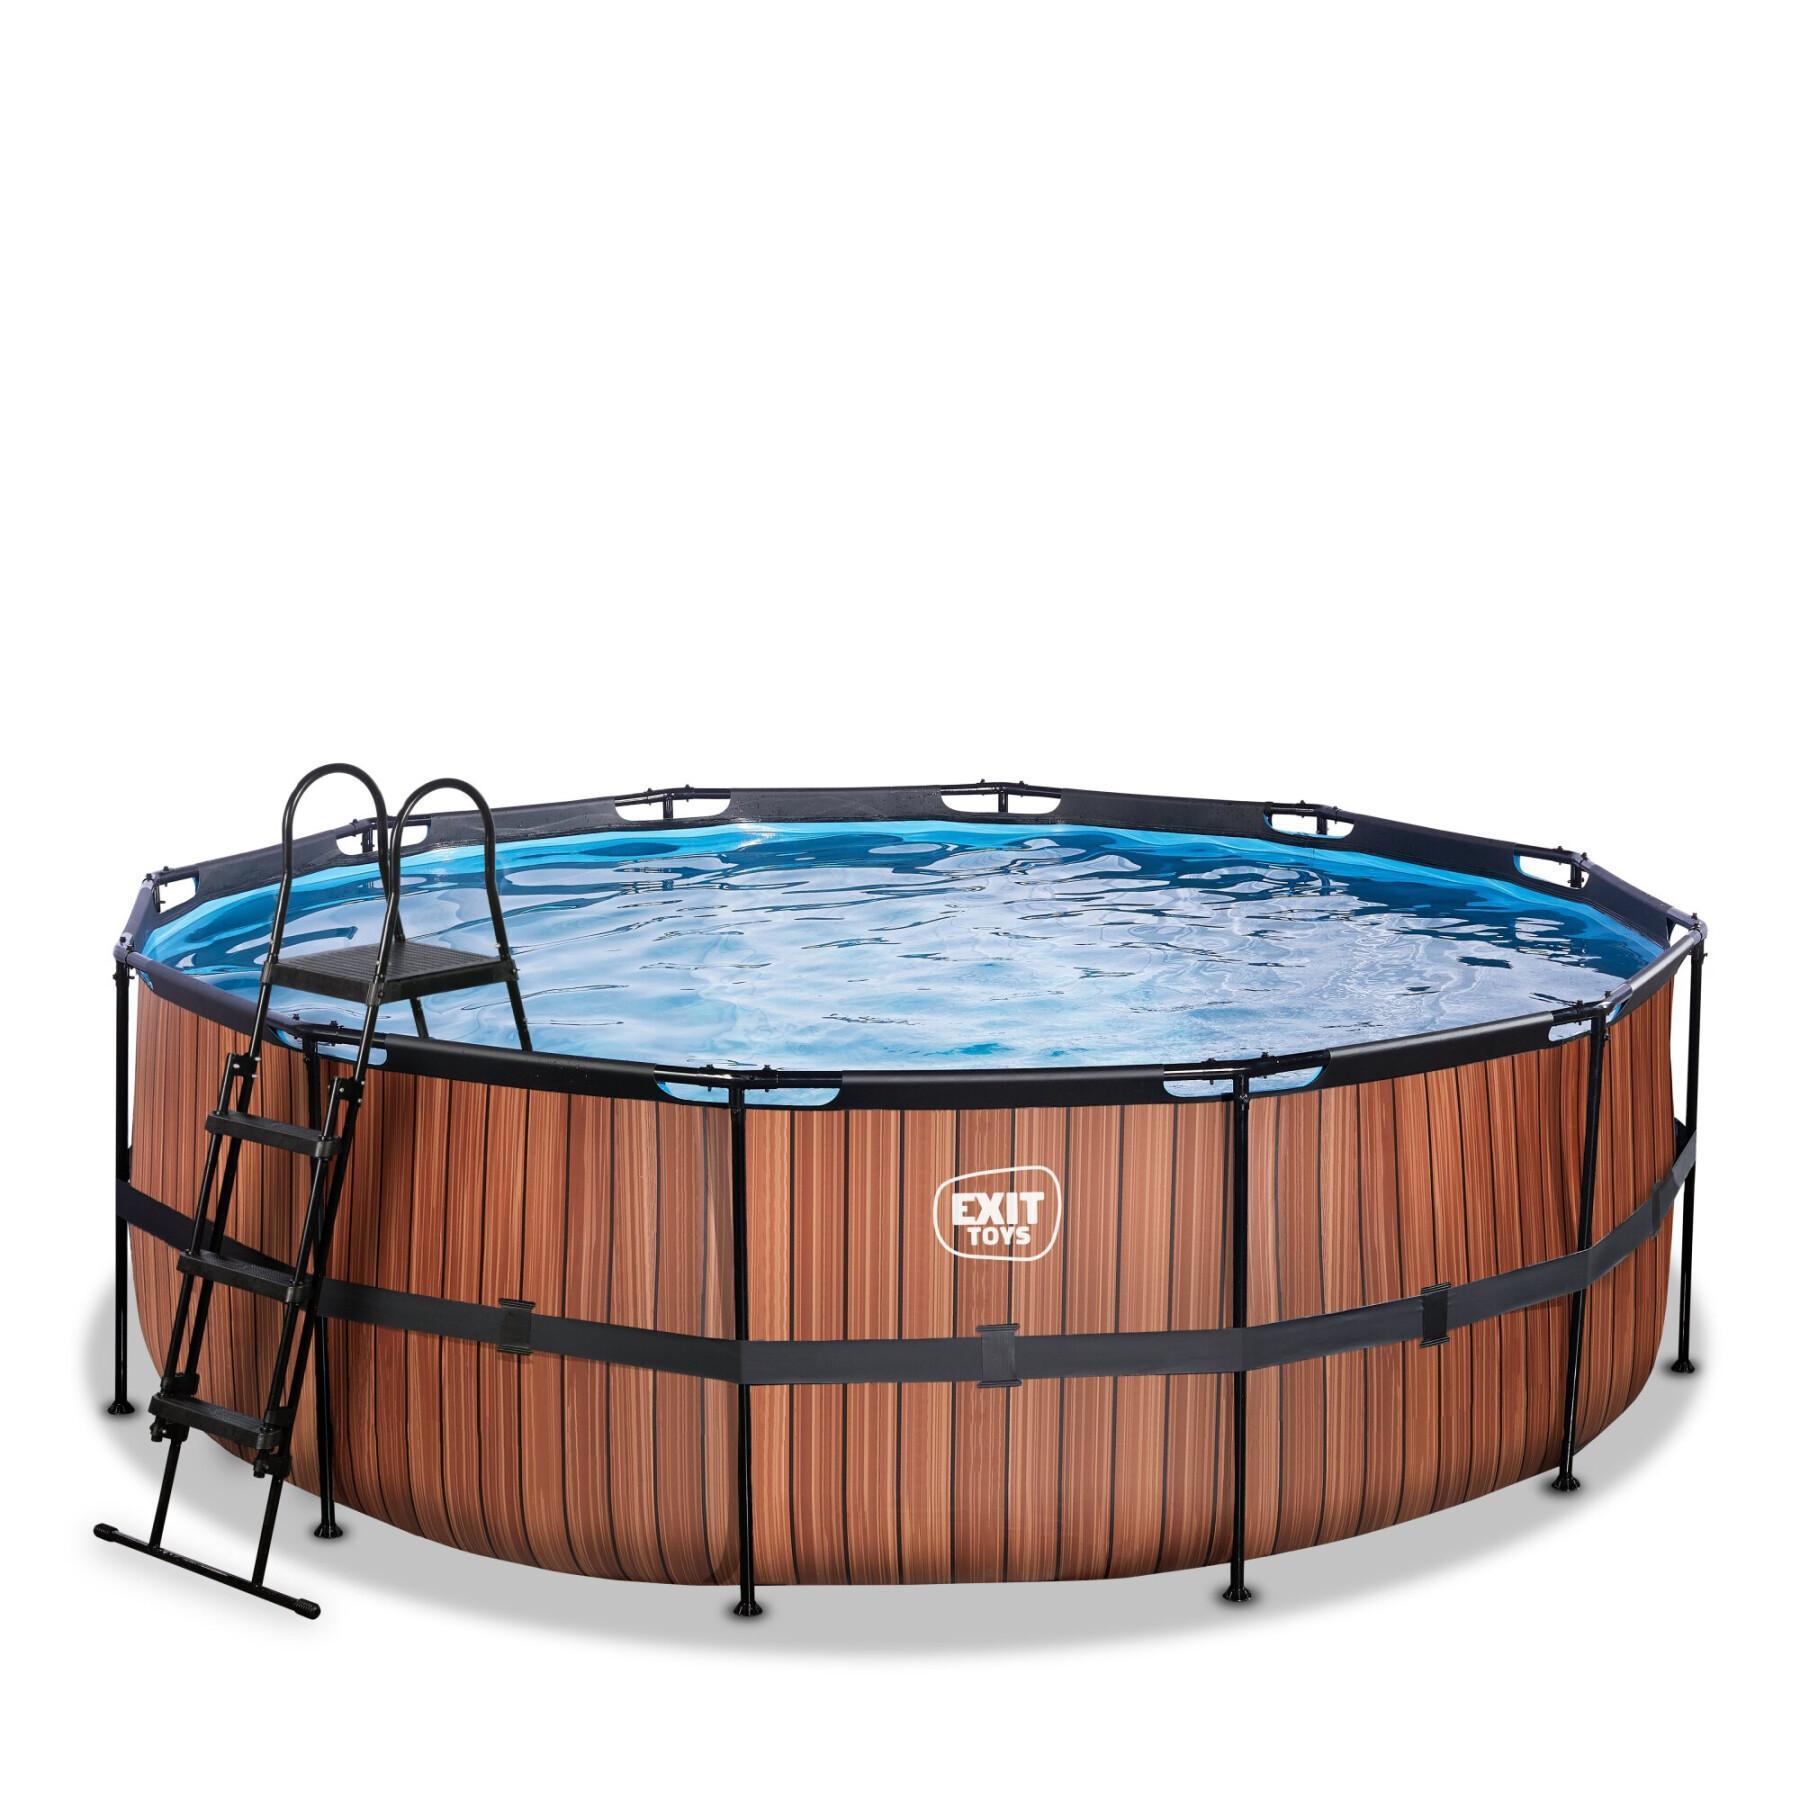 Swimming pool with children's filter pump Exit Toys Wood 427 x 122 cm